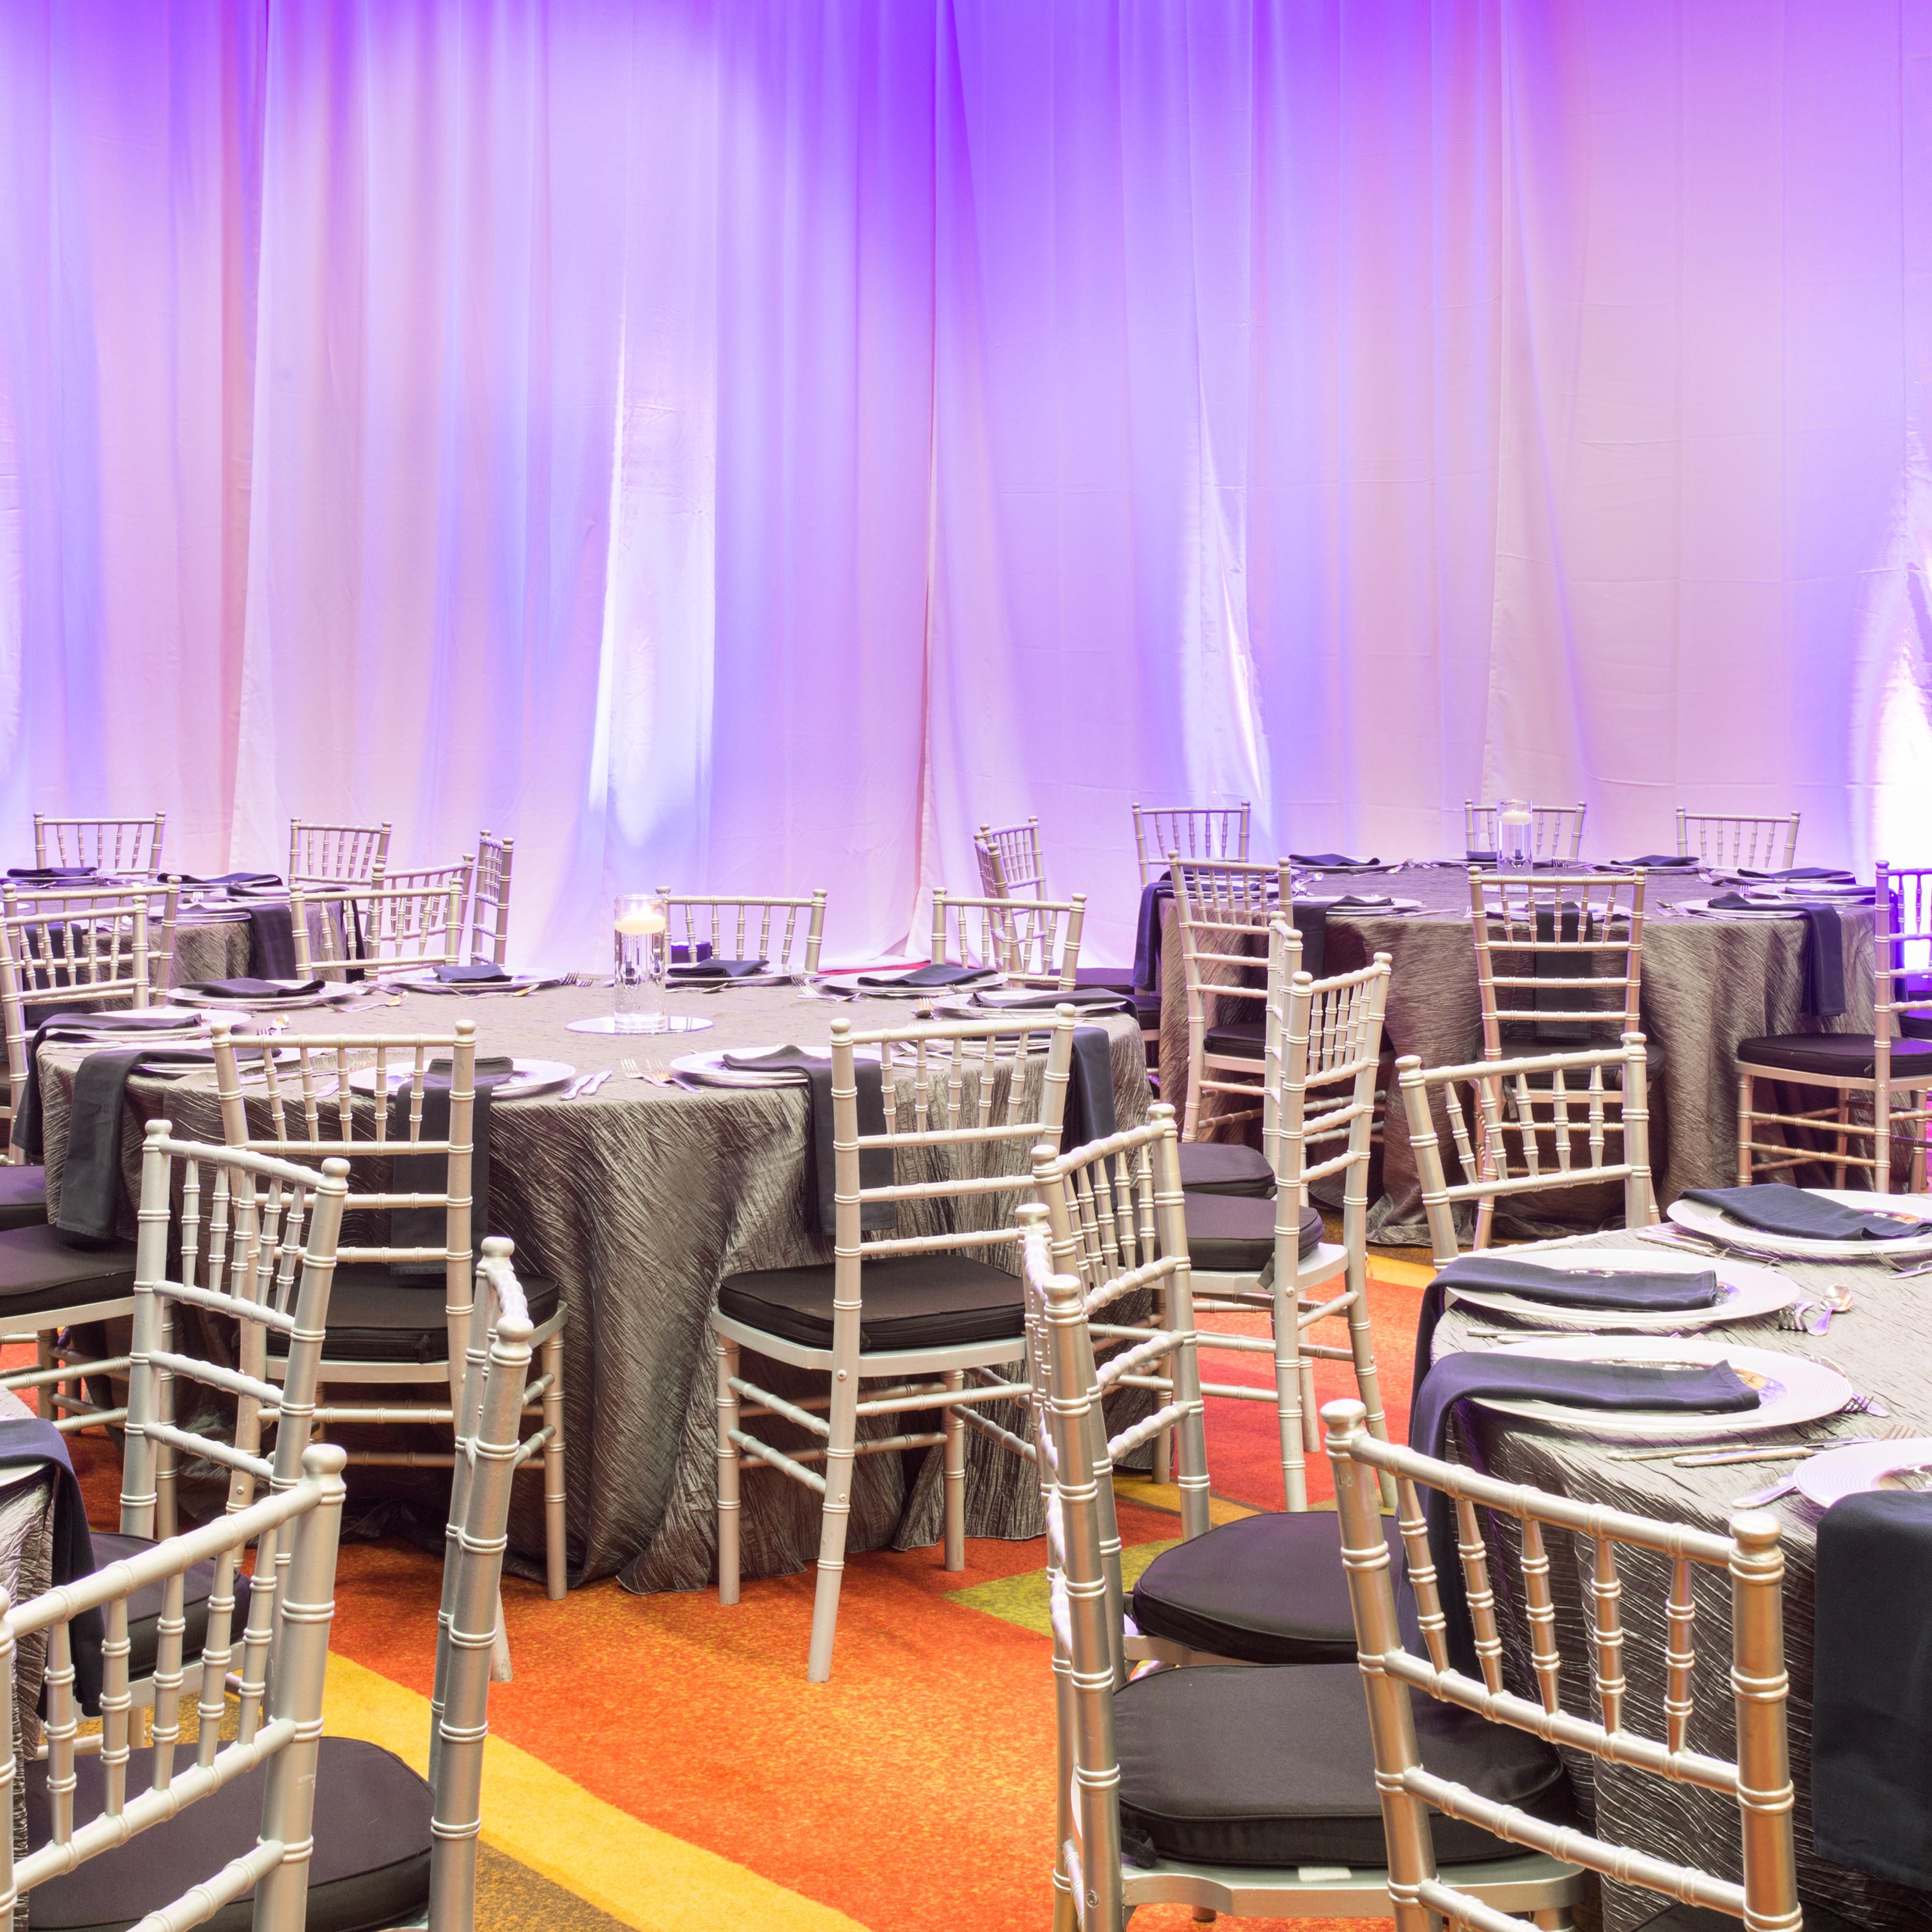 Let us take care of you and your event in our Breckenridge Room